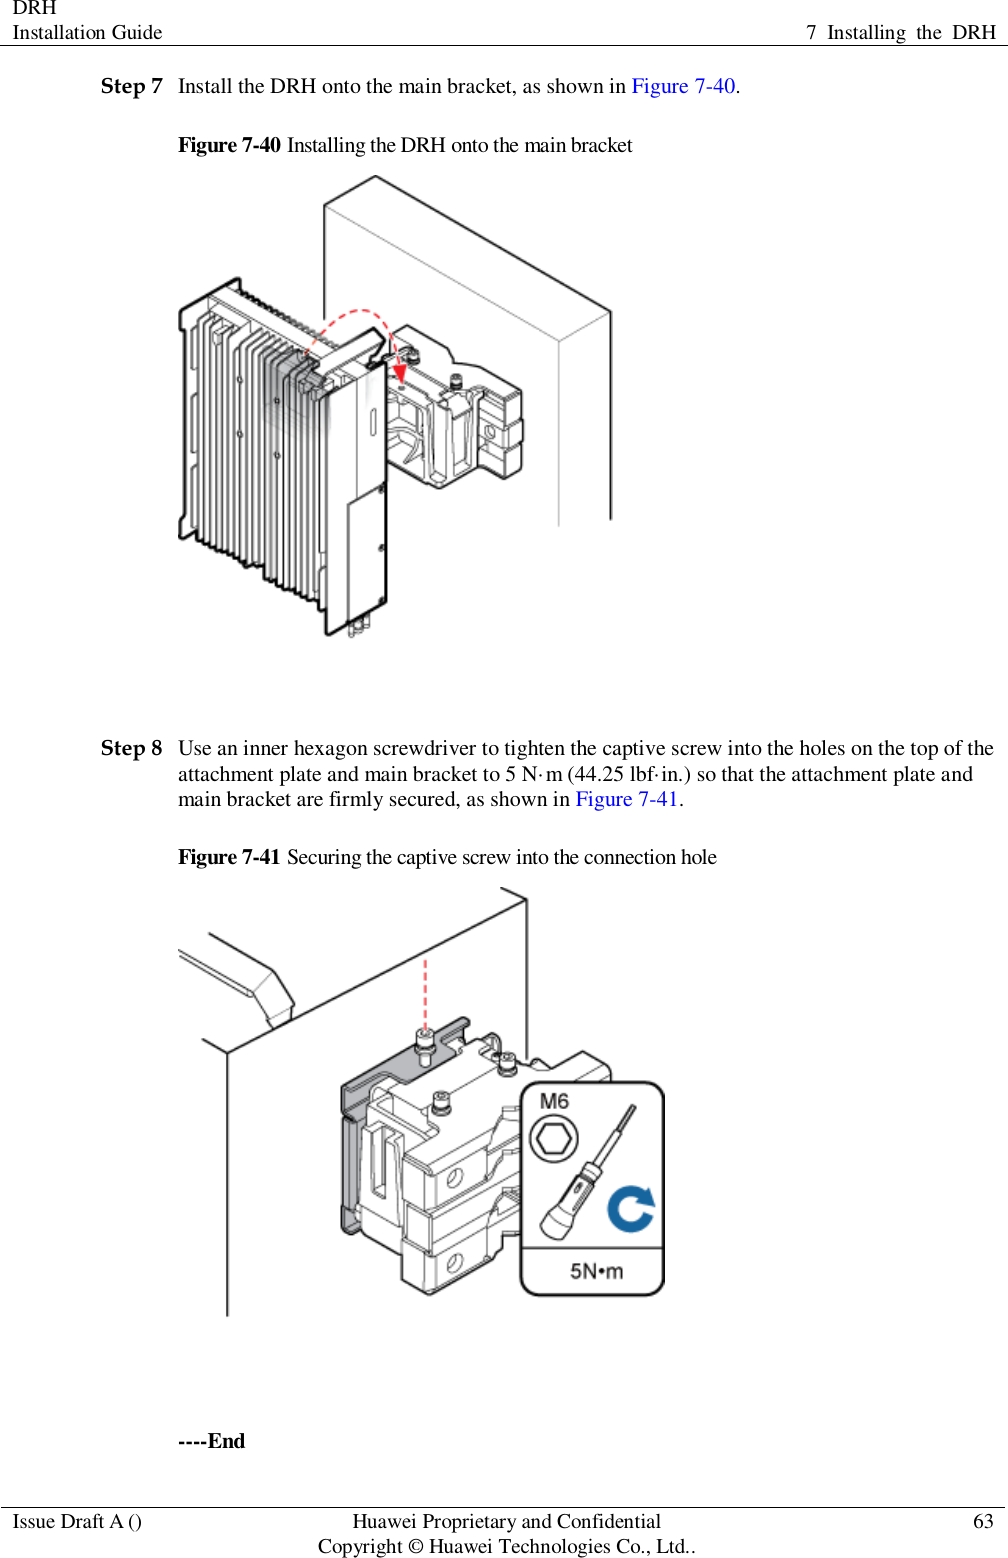 DRH   Installation Guide 7  Installing  the  DRH  Issue Draft A () Huawei Proprietary and Confidential                                     Copyright © Huawei Technologies Co., Ltd.. 63  Step 7 Install the DRH onto the main bracket, as shown in Figure 7-40. Figure 7-40 Installing the DRH onto the main bracket   Step 8 Use an inner hexagon screwdriver to tighten the captive screw into the holes on the top of the attachment plate and main bracket to 5 N·m (44.25 lbf·in.) so that the attachment plate and main bracket are firmly secured, as shown in Figure 7-41. Figure 7-41 Securing the captive screw into the connection hole   ----End 